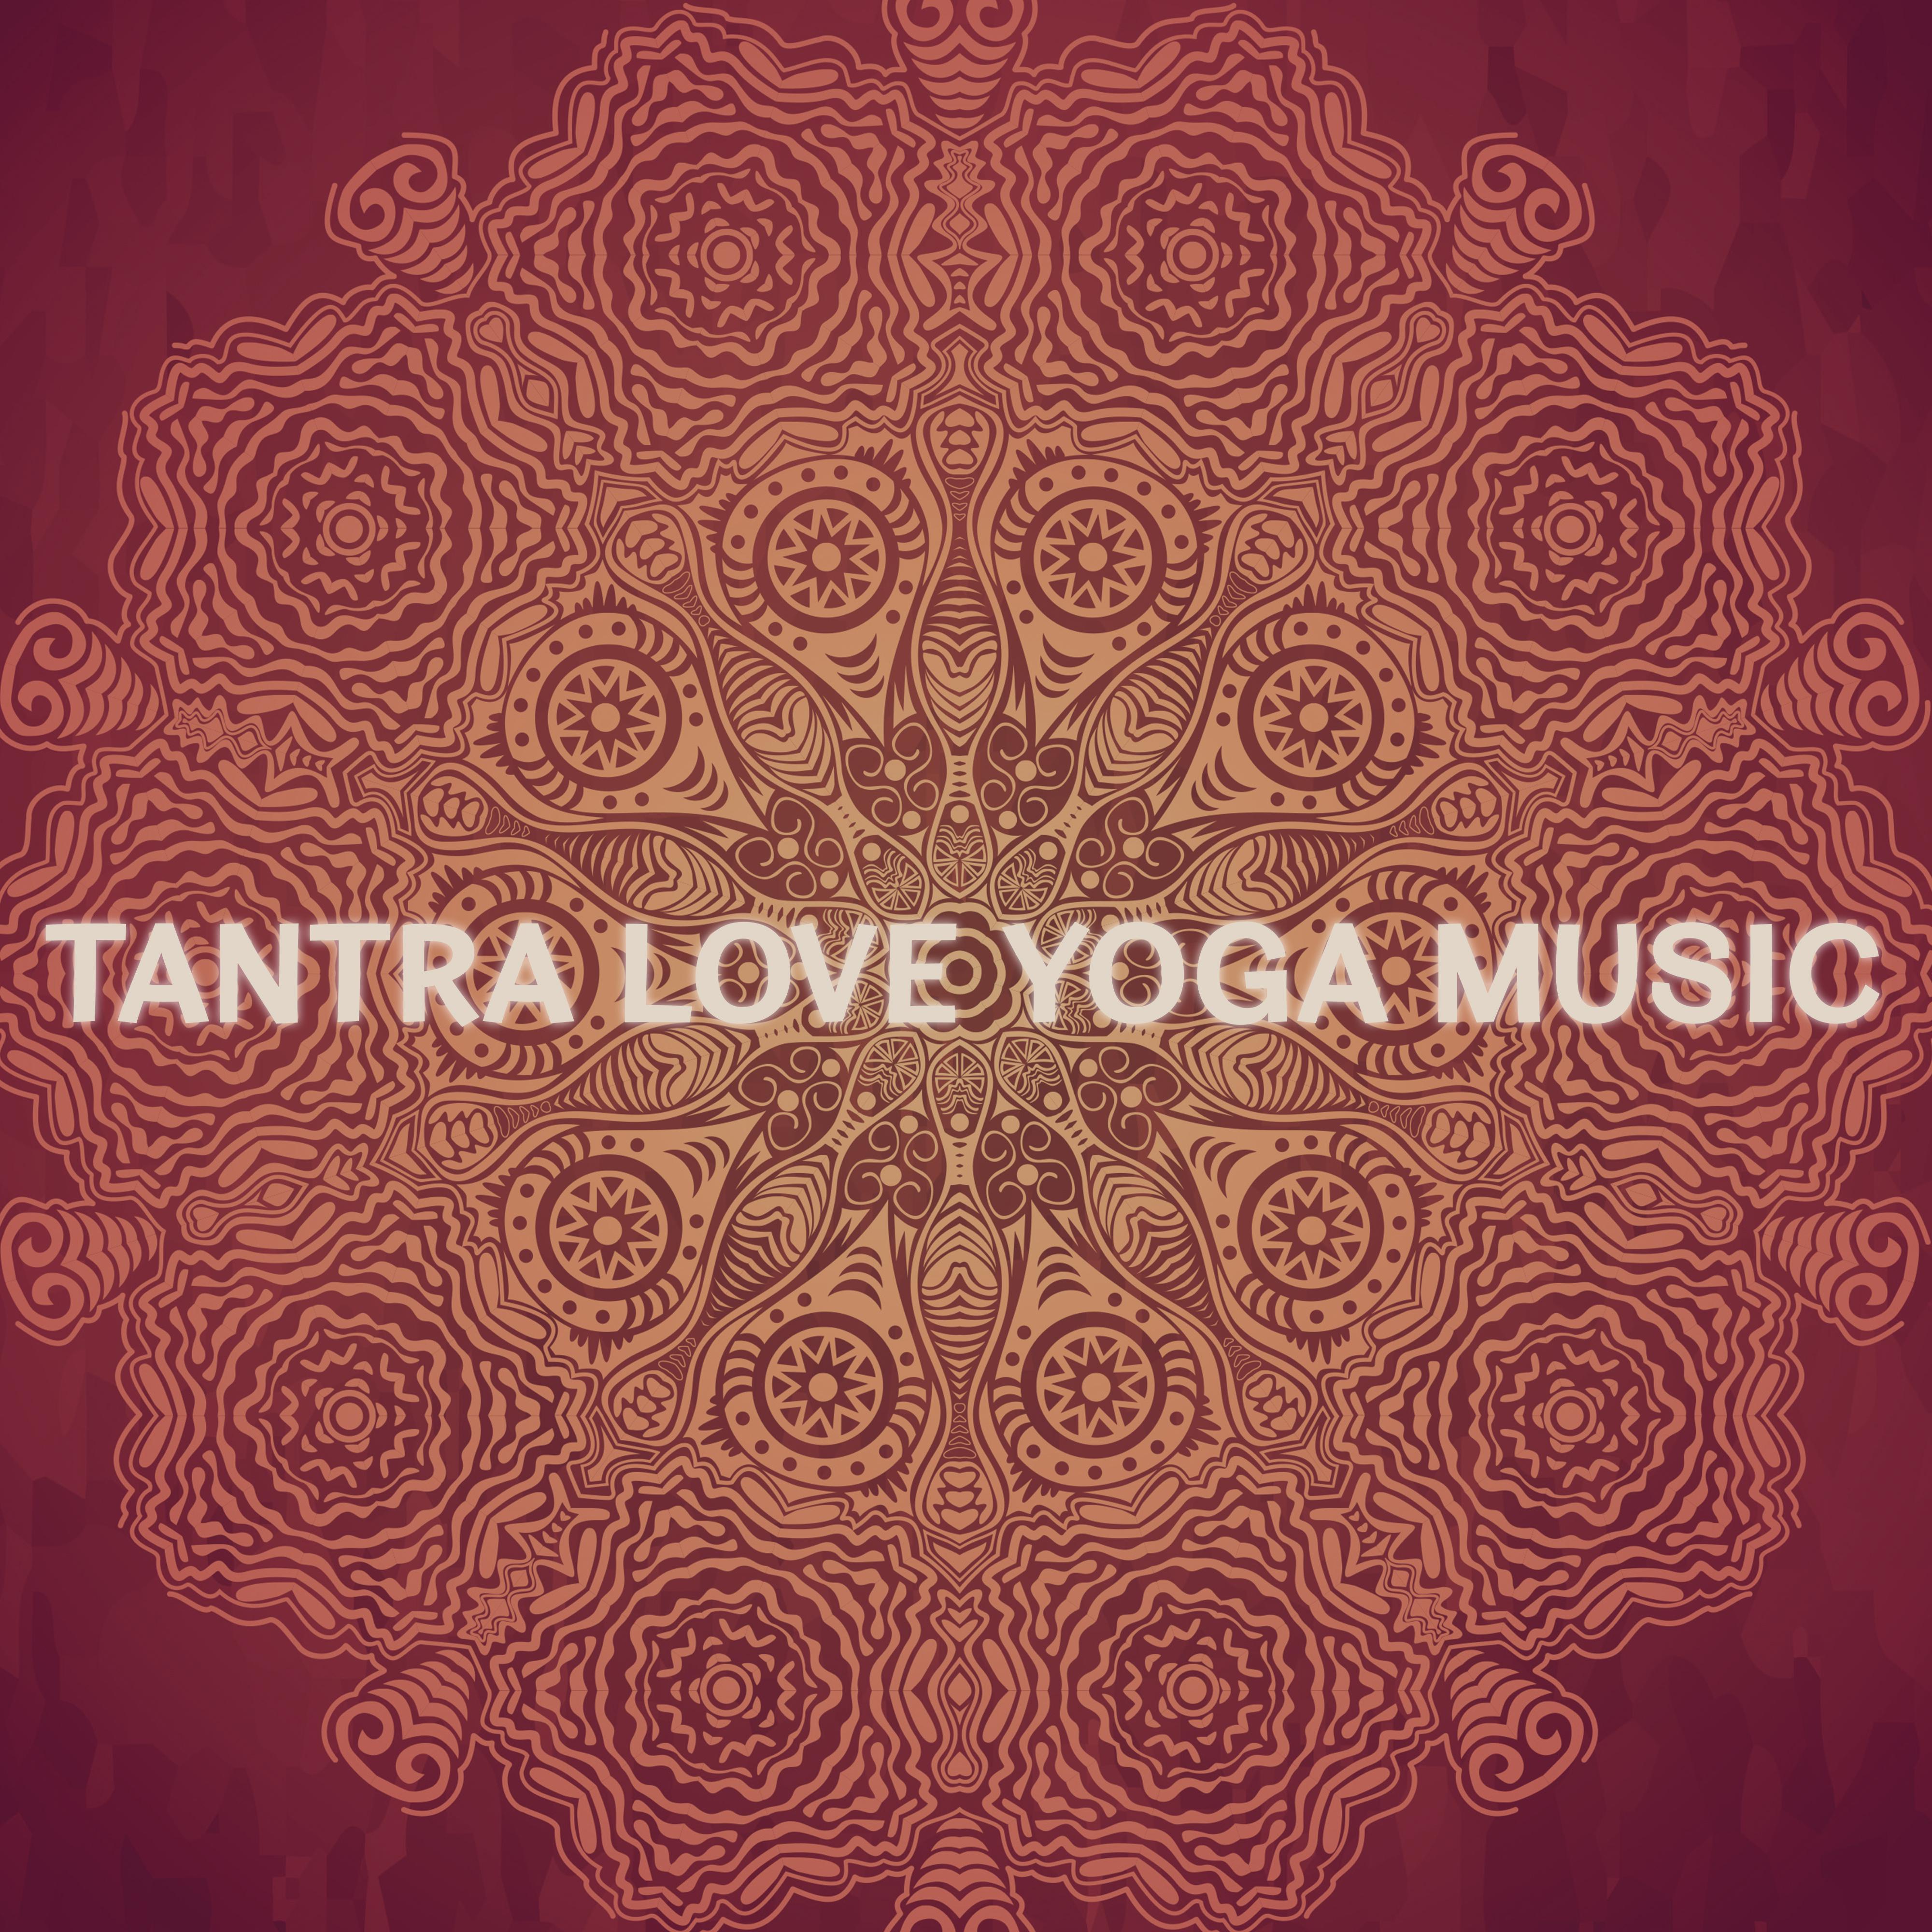 Tantra Love Yoga Music – Sensual New Age Music, Tantra Music, Instrumental Sounds, Soothing Yoga Music